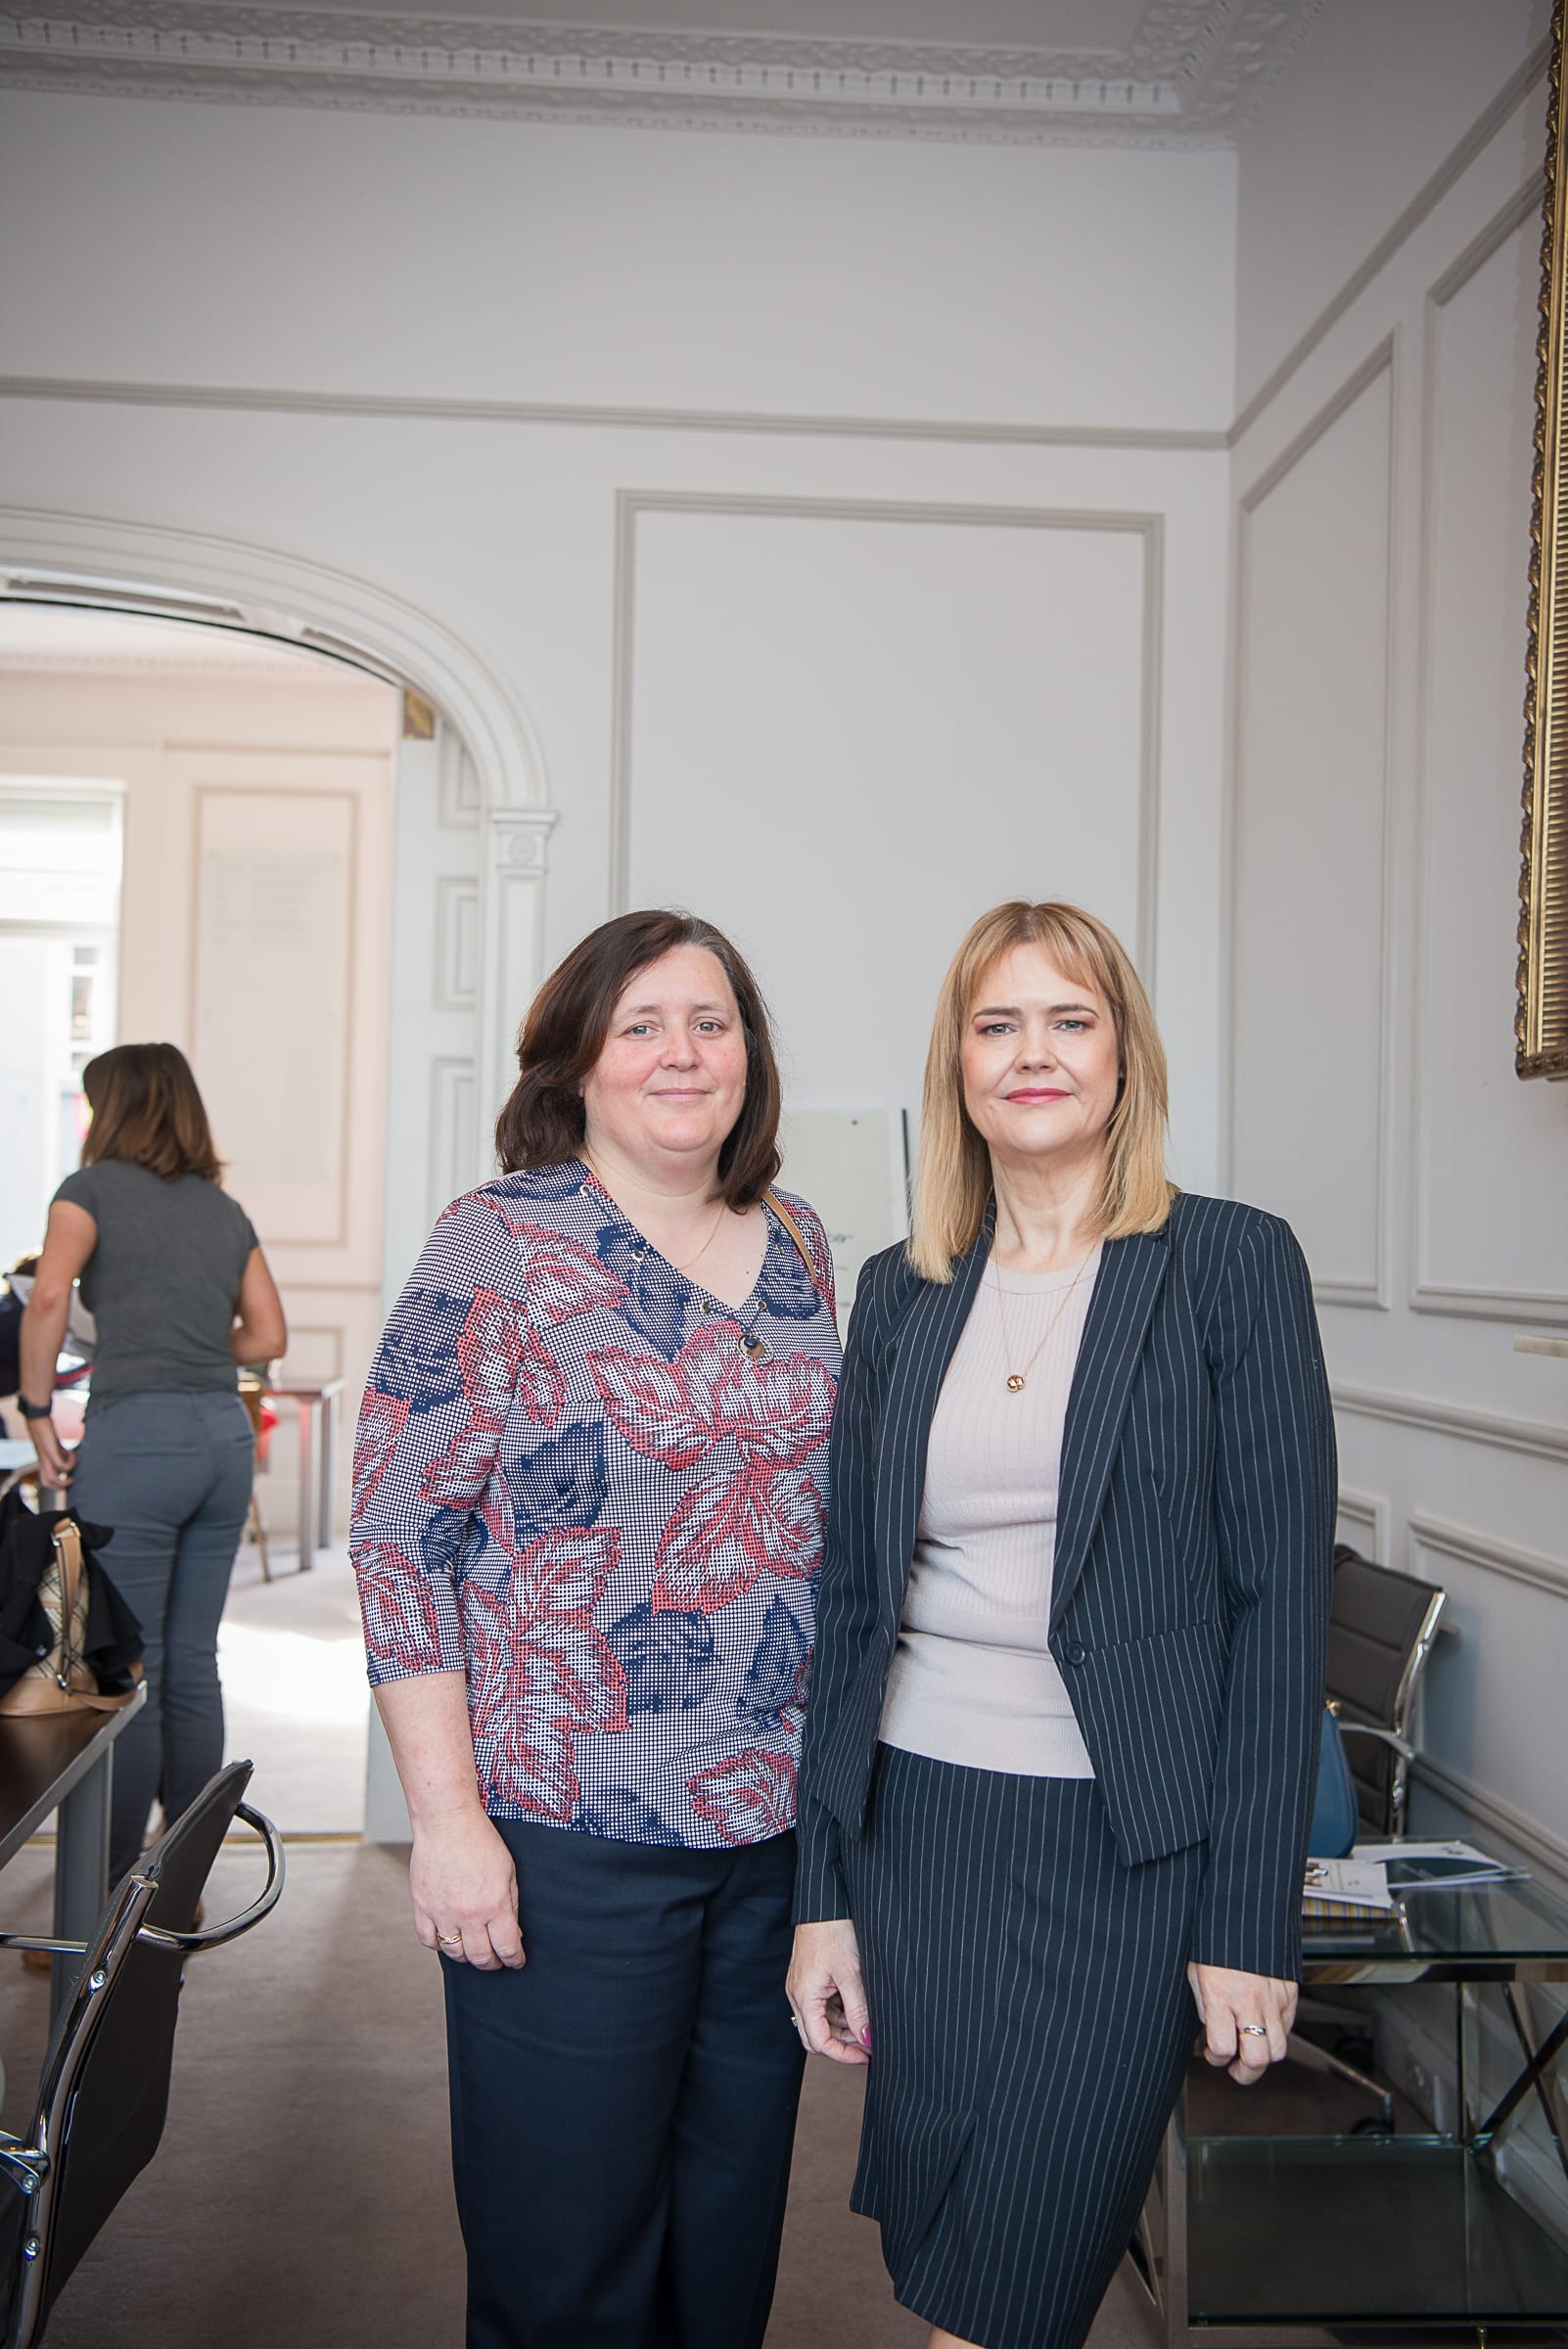 From Left to Right:  Marketing Collective Advice Clinic supported by Skillnet
which took place on the 30th May in function room of the Limerick Chamber: Dervilla Ryan and Sinead Morrissey - Both from Office Helpers. 
Photo by Morning Star Photography